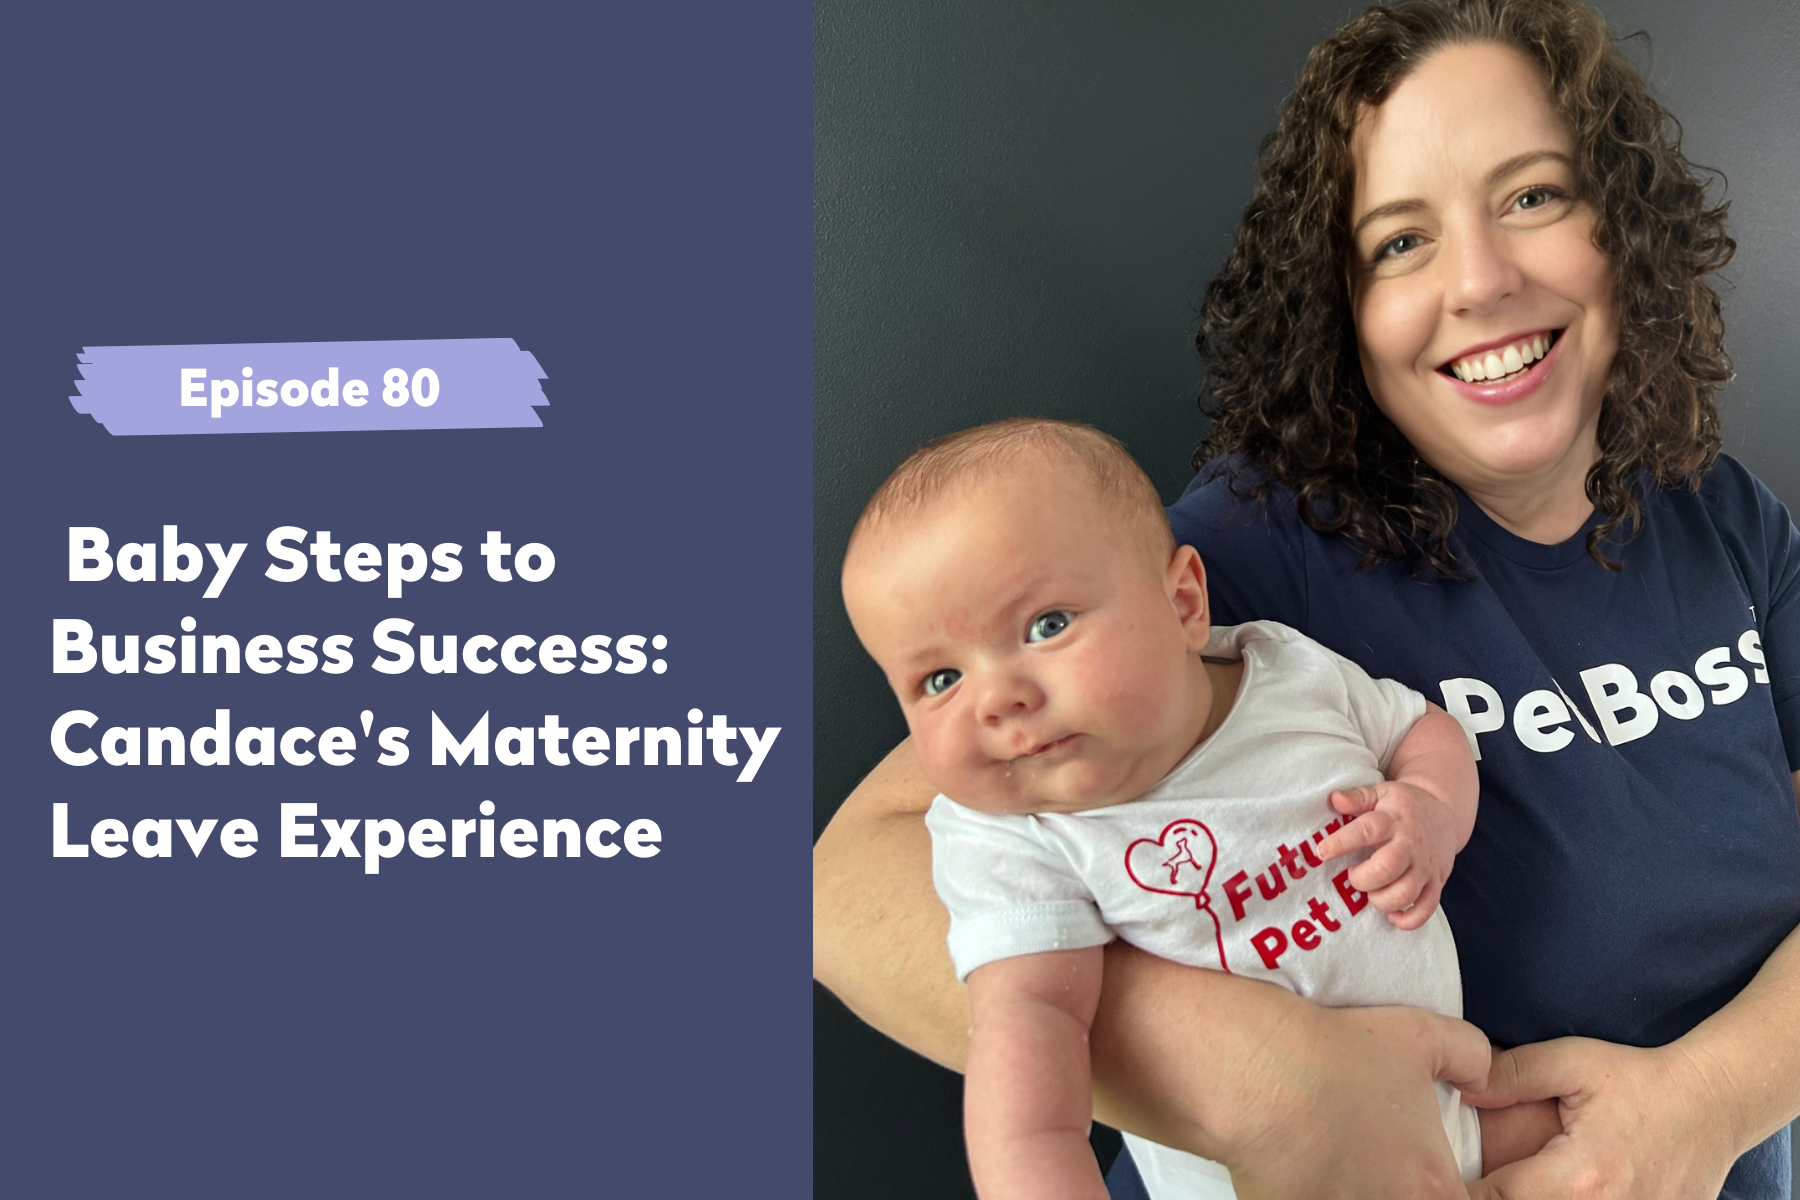 Pet Boss Nation Baby Steps to Business Success: Candace's Maternity Leave Experience